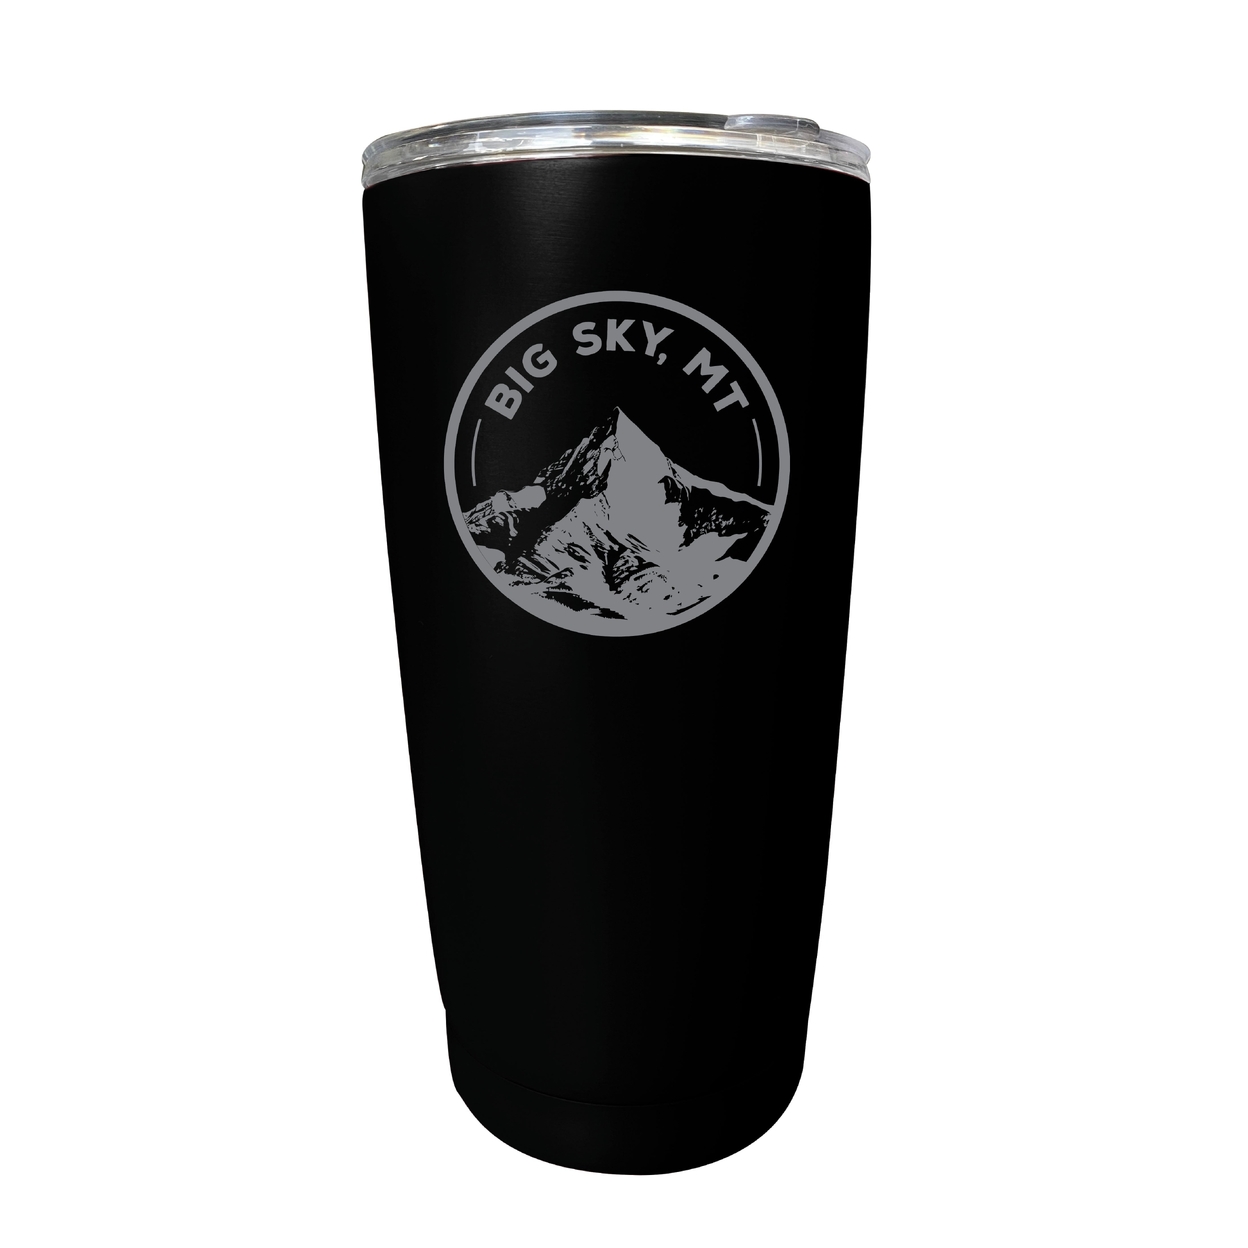 Big Sky Montana Souvenir 16 Oz Engraved Stainless Steel Insulated Tumbler - Black,,4-Pack